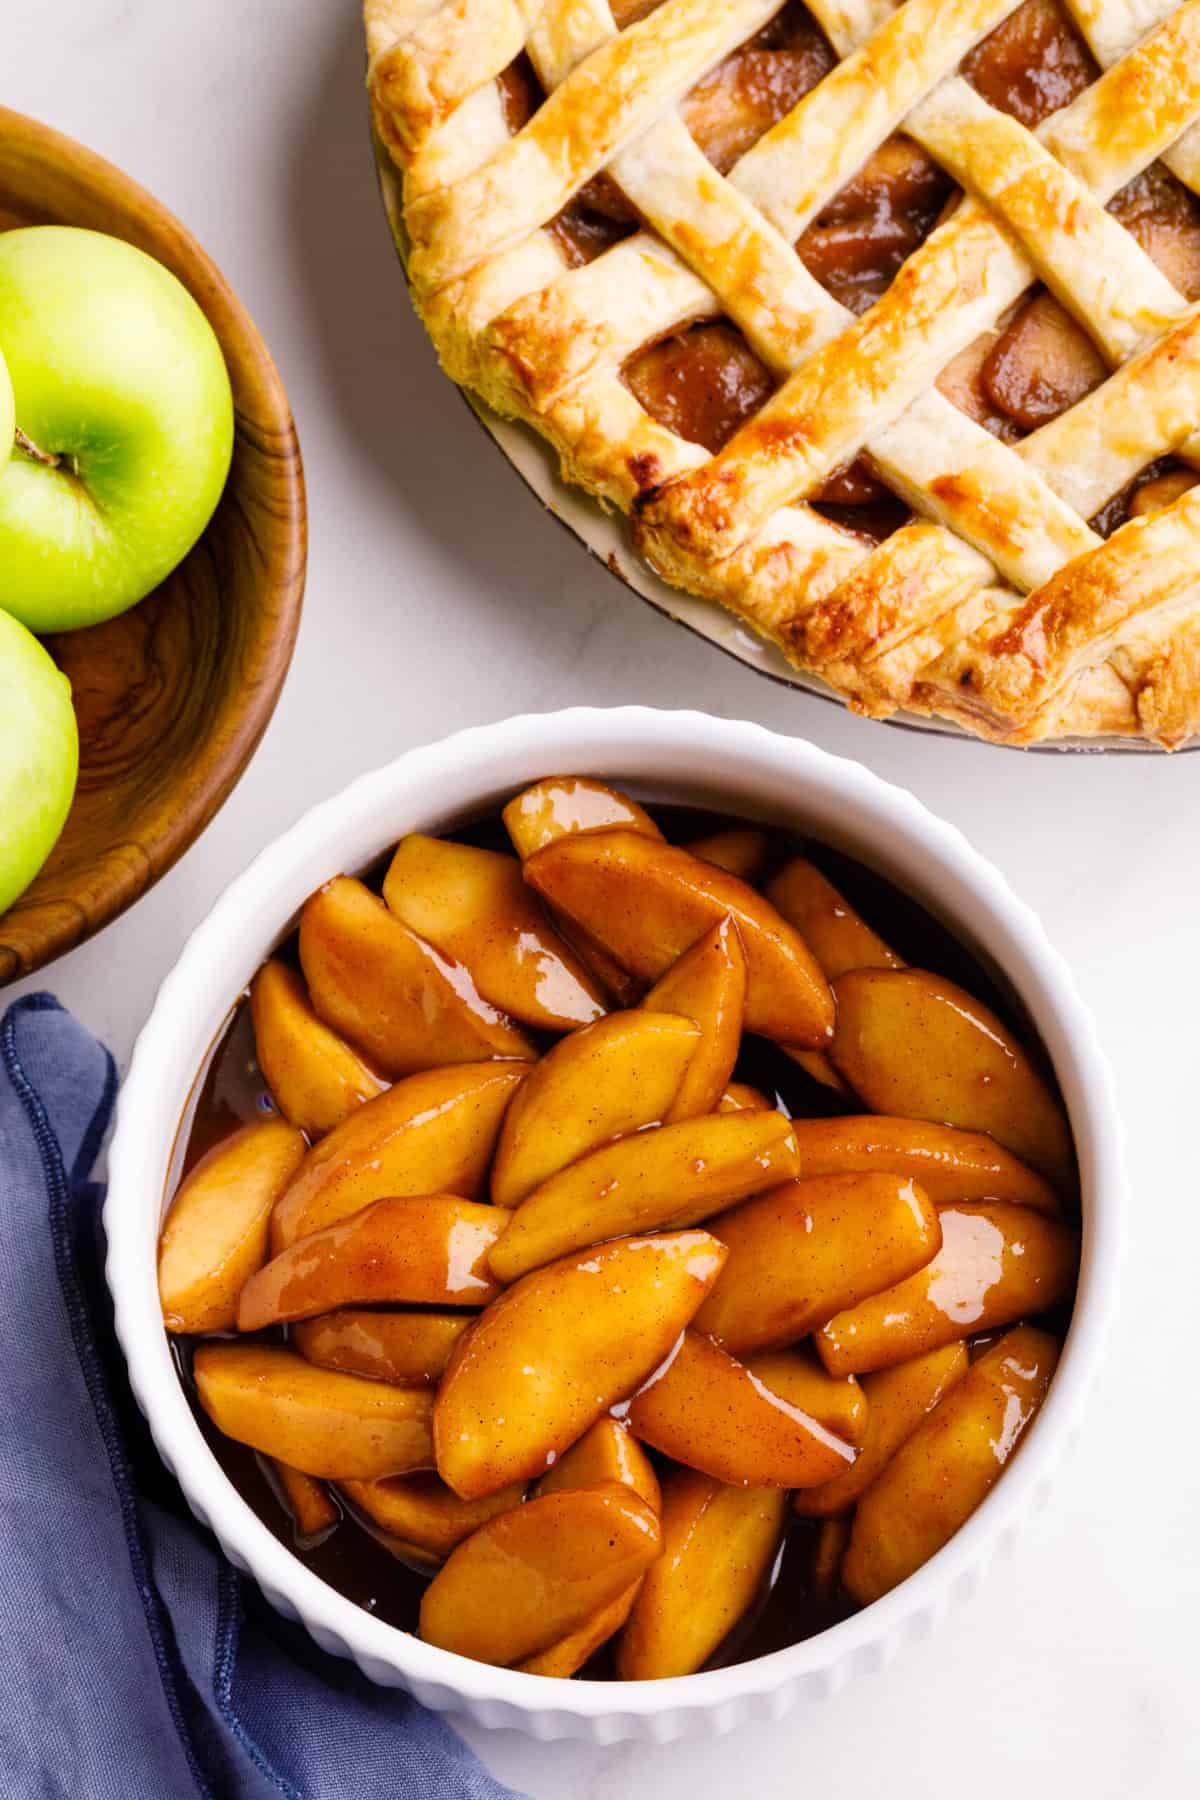 A top down image of a bowl of apple pie filling with a bowl of green apples and a latticed apple pie next to it.